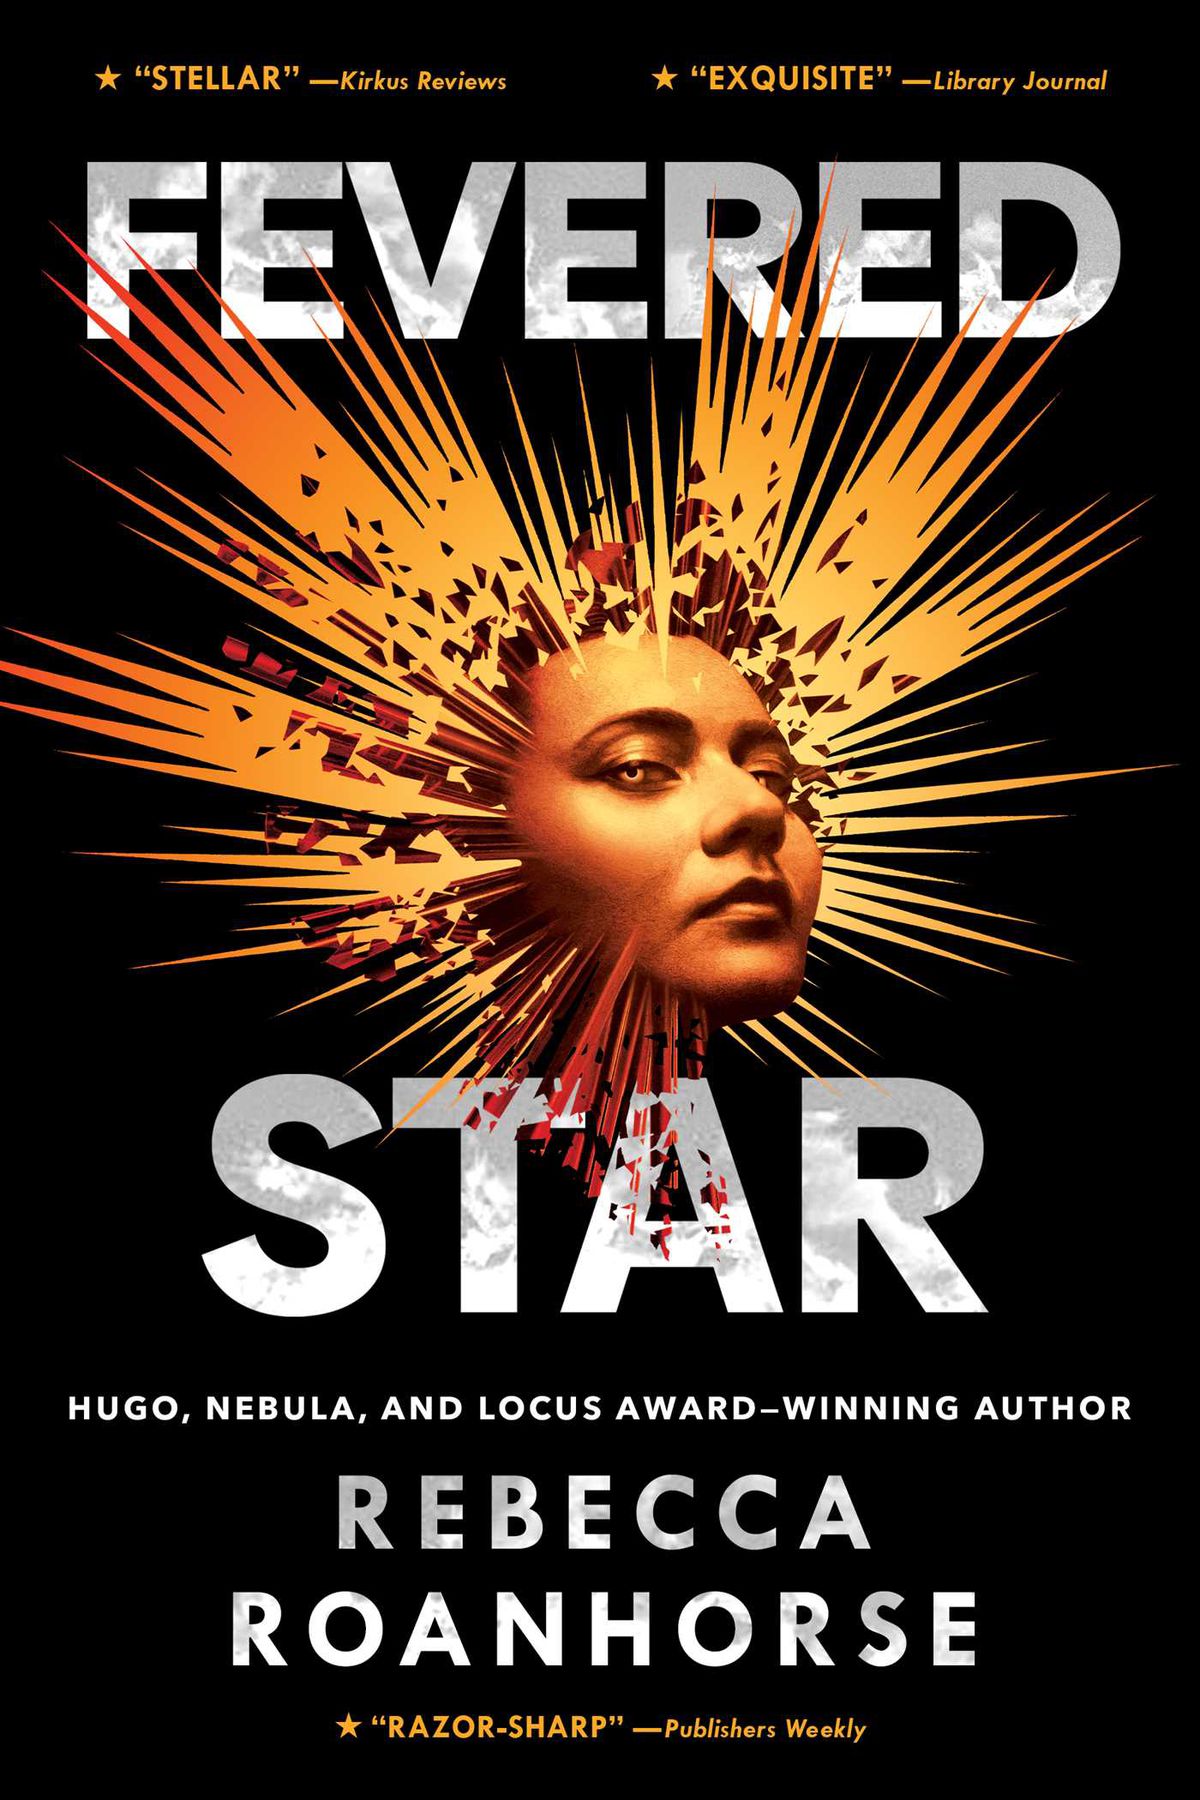 The cover for Fevered Star, which centers a face with illustrated golden light piercing out around it.